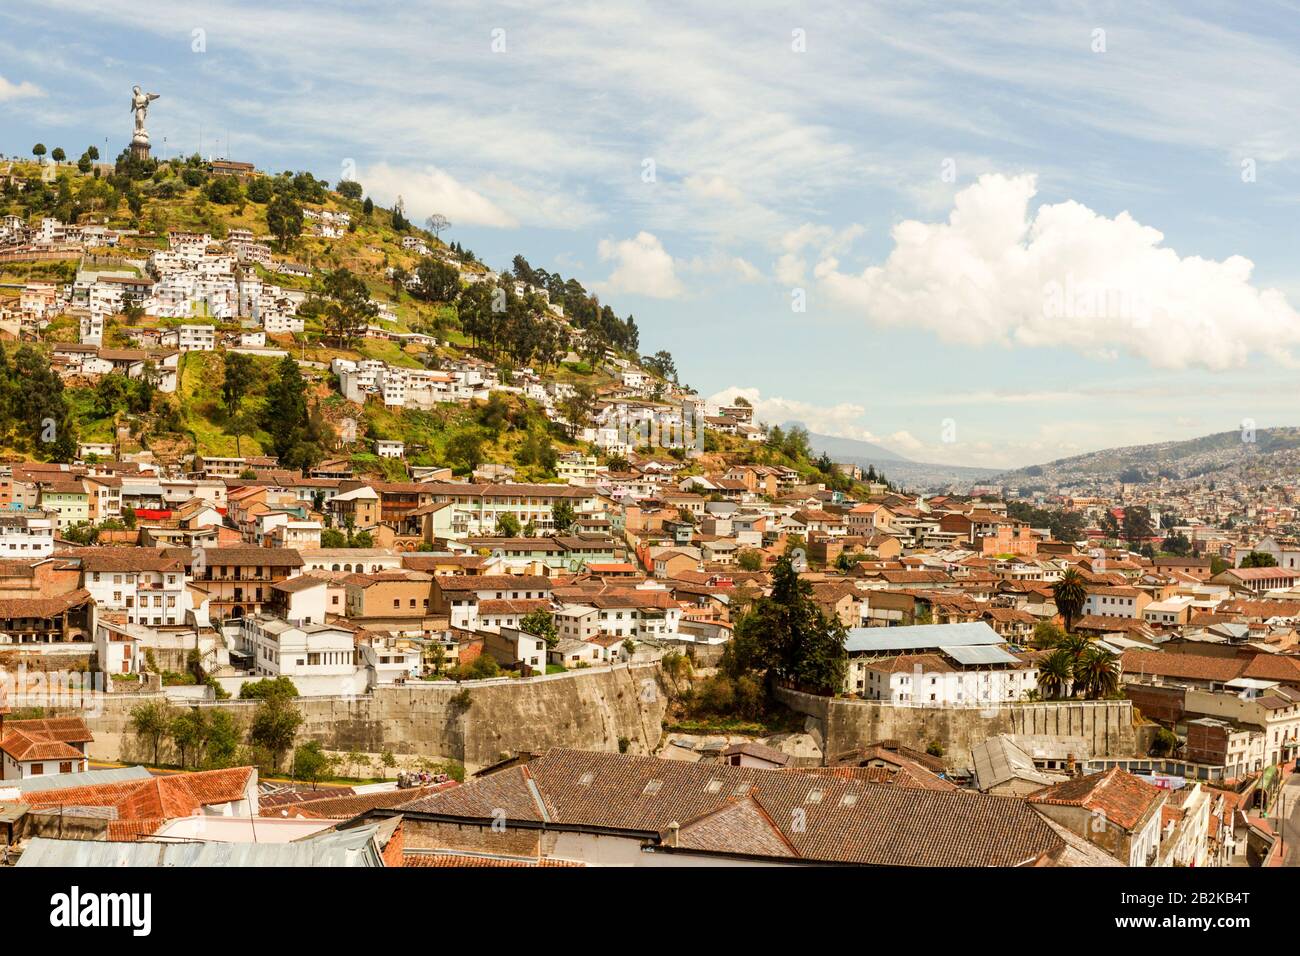 Quito Ecuador Cityscape With The Statue Of The Virgin On The Right Top This Point Is Dividing North From The South Of The City Stock Photo